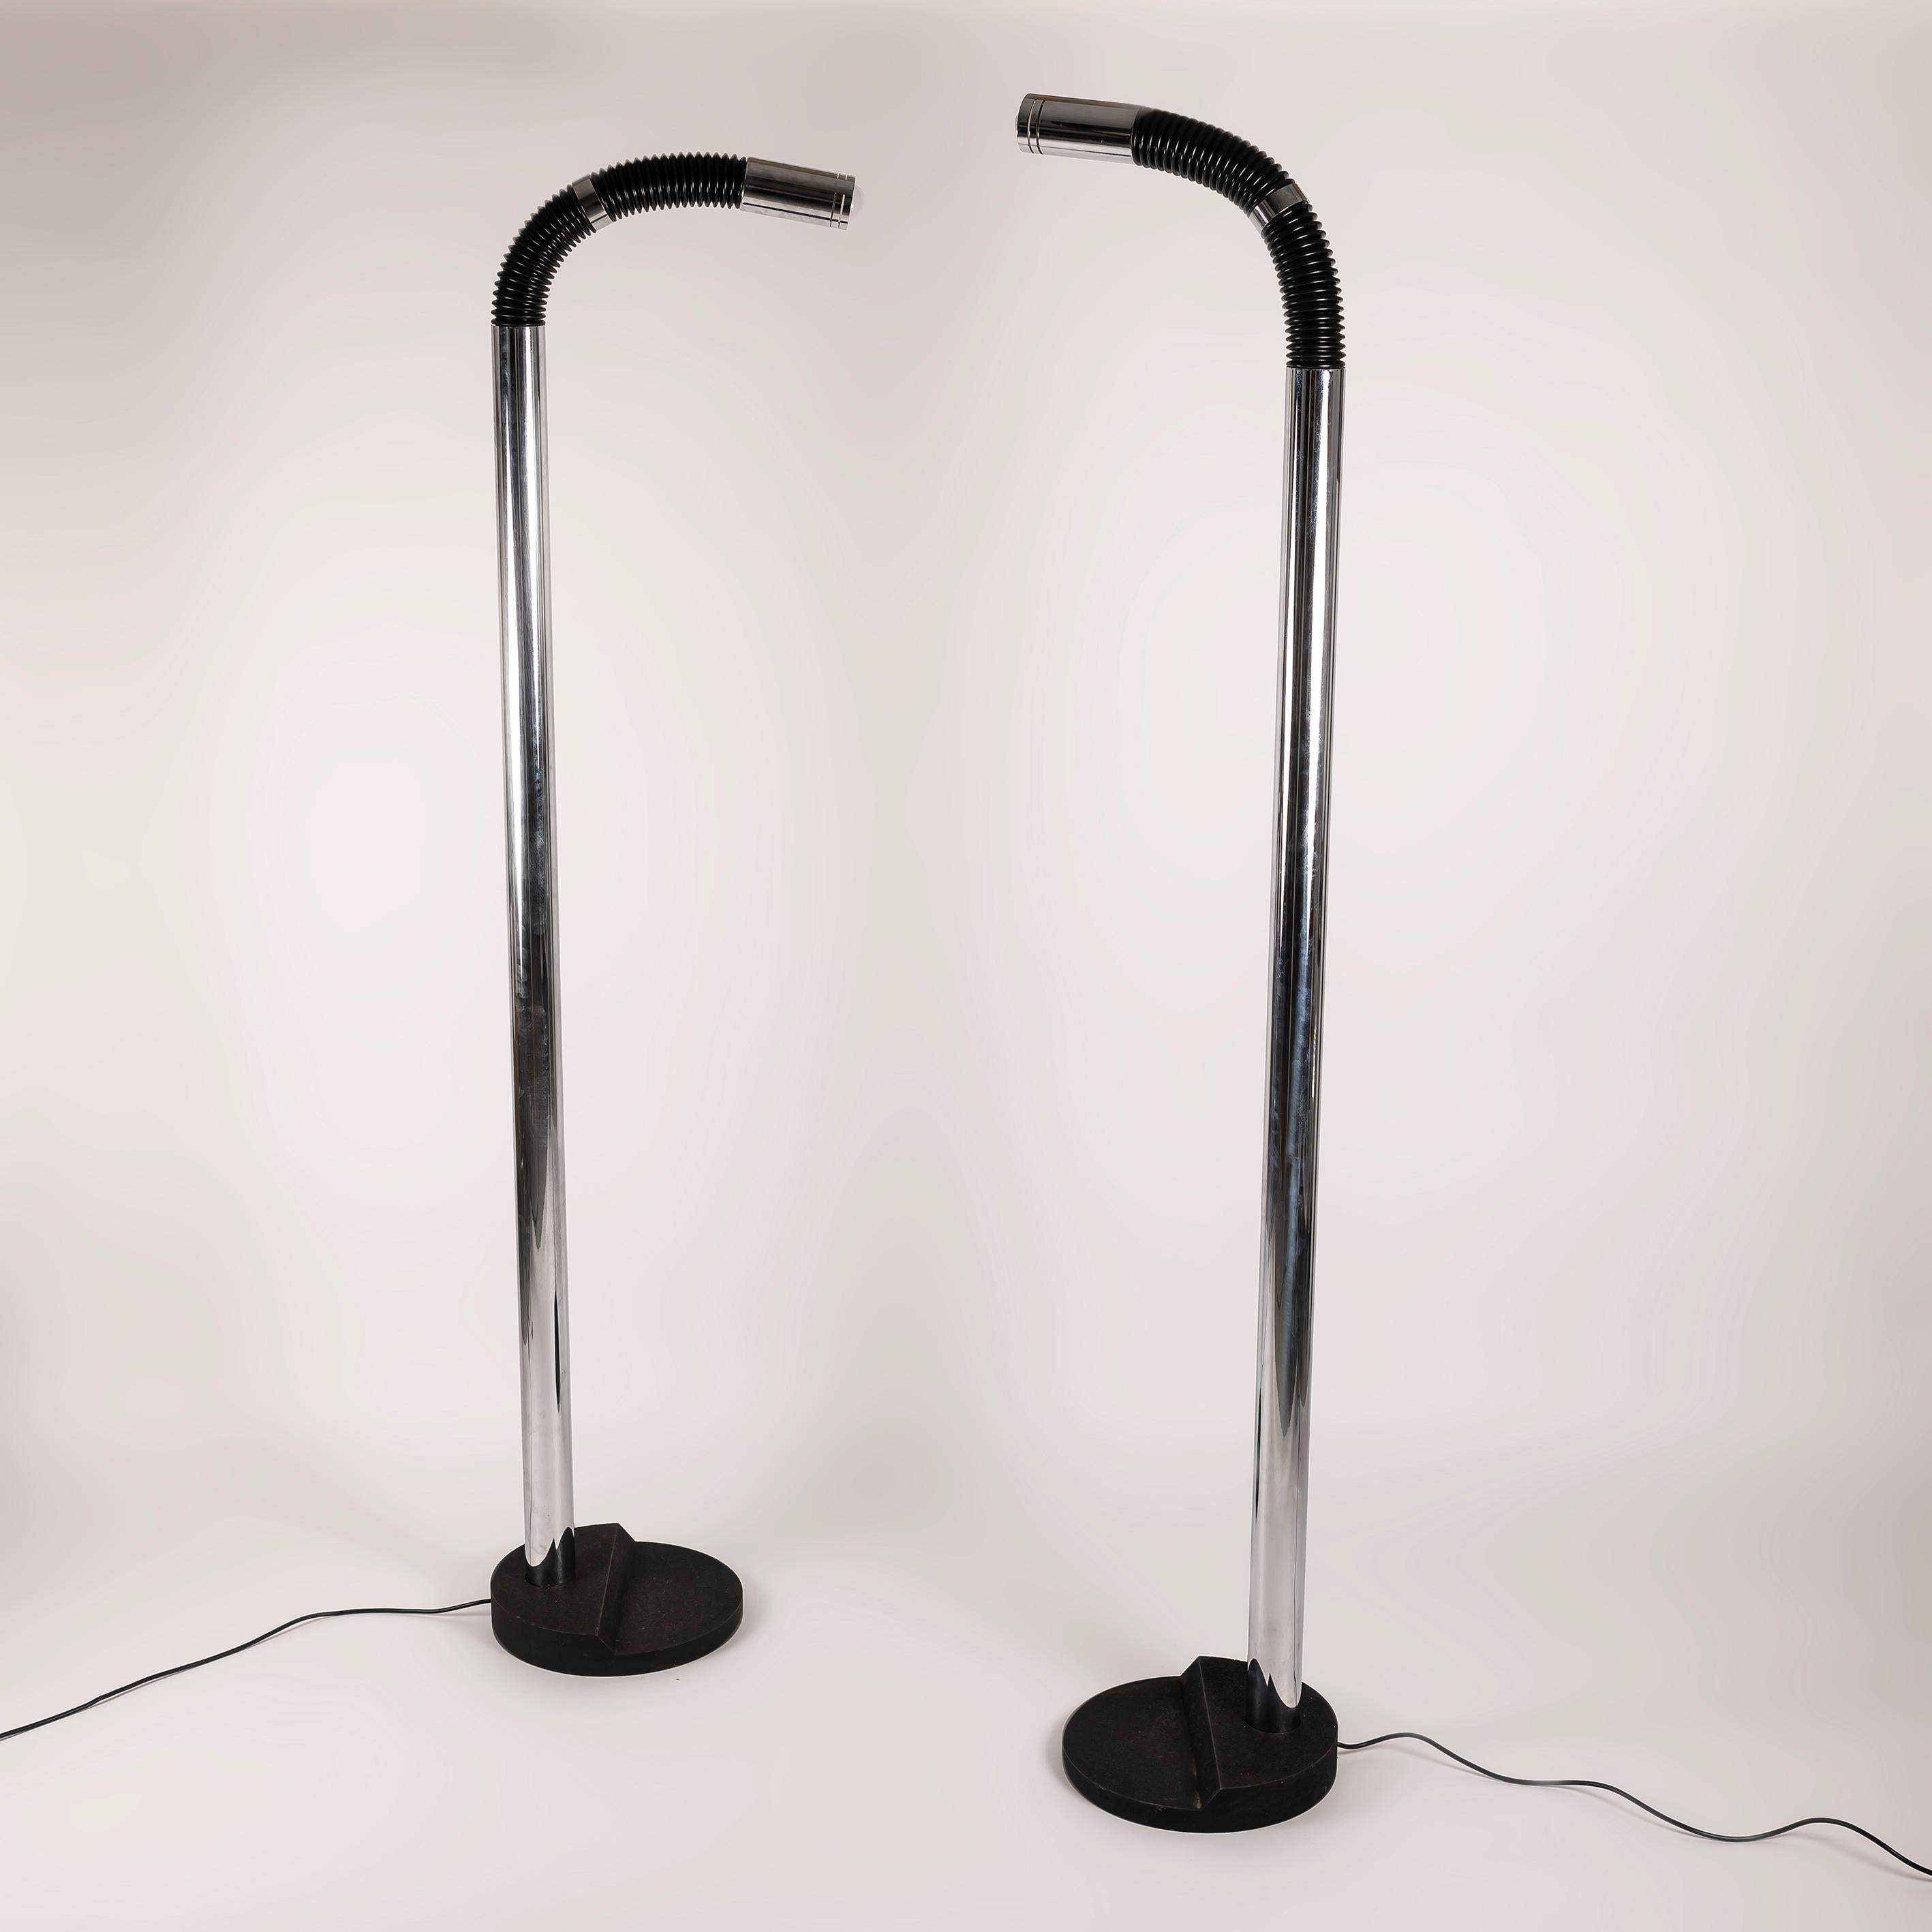 Space Age Italian Floor Lamps in Lacquered Iron and Chromed Metal, 1970s For Sale 7